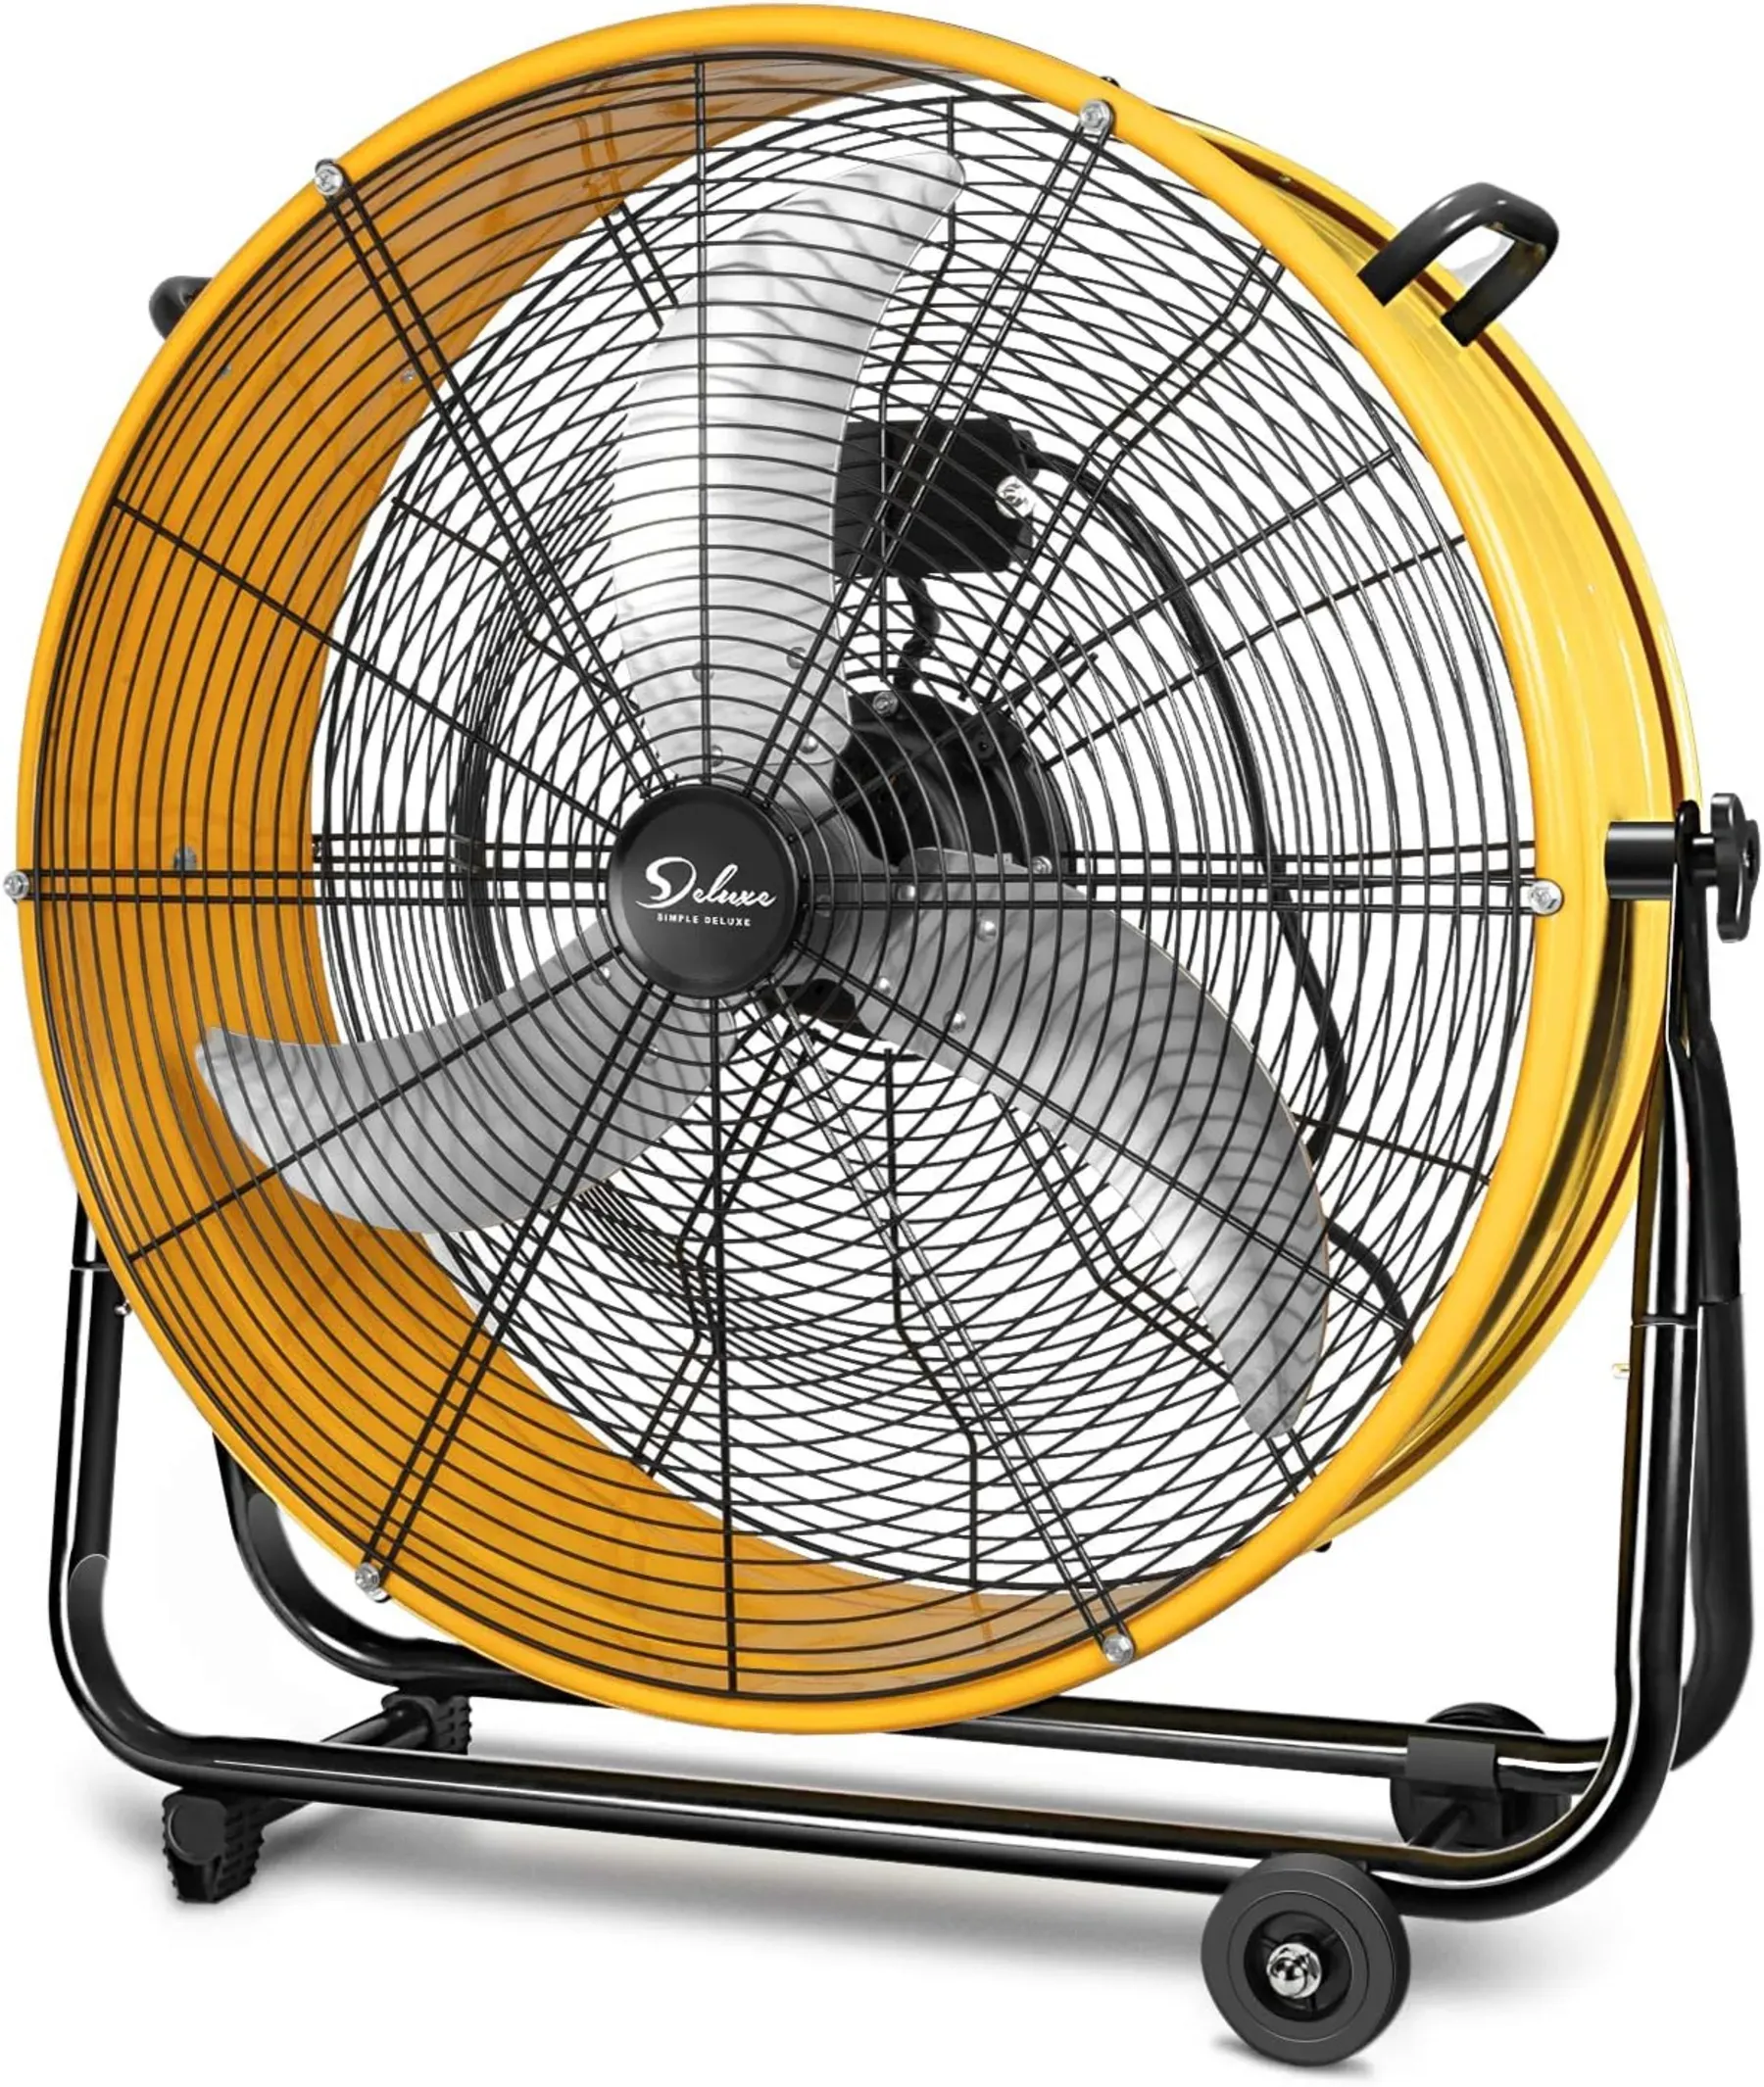 Rev Up Your Workspace with The Best Garage Fan Solutions!